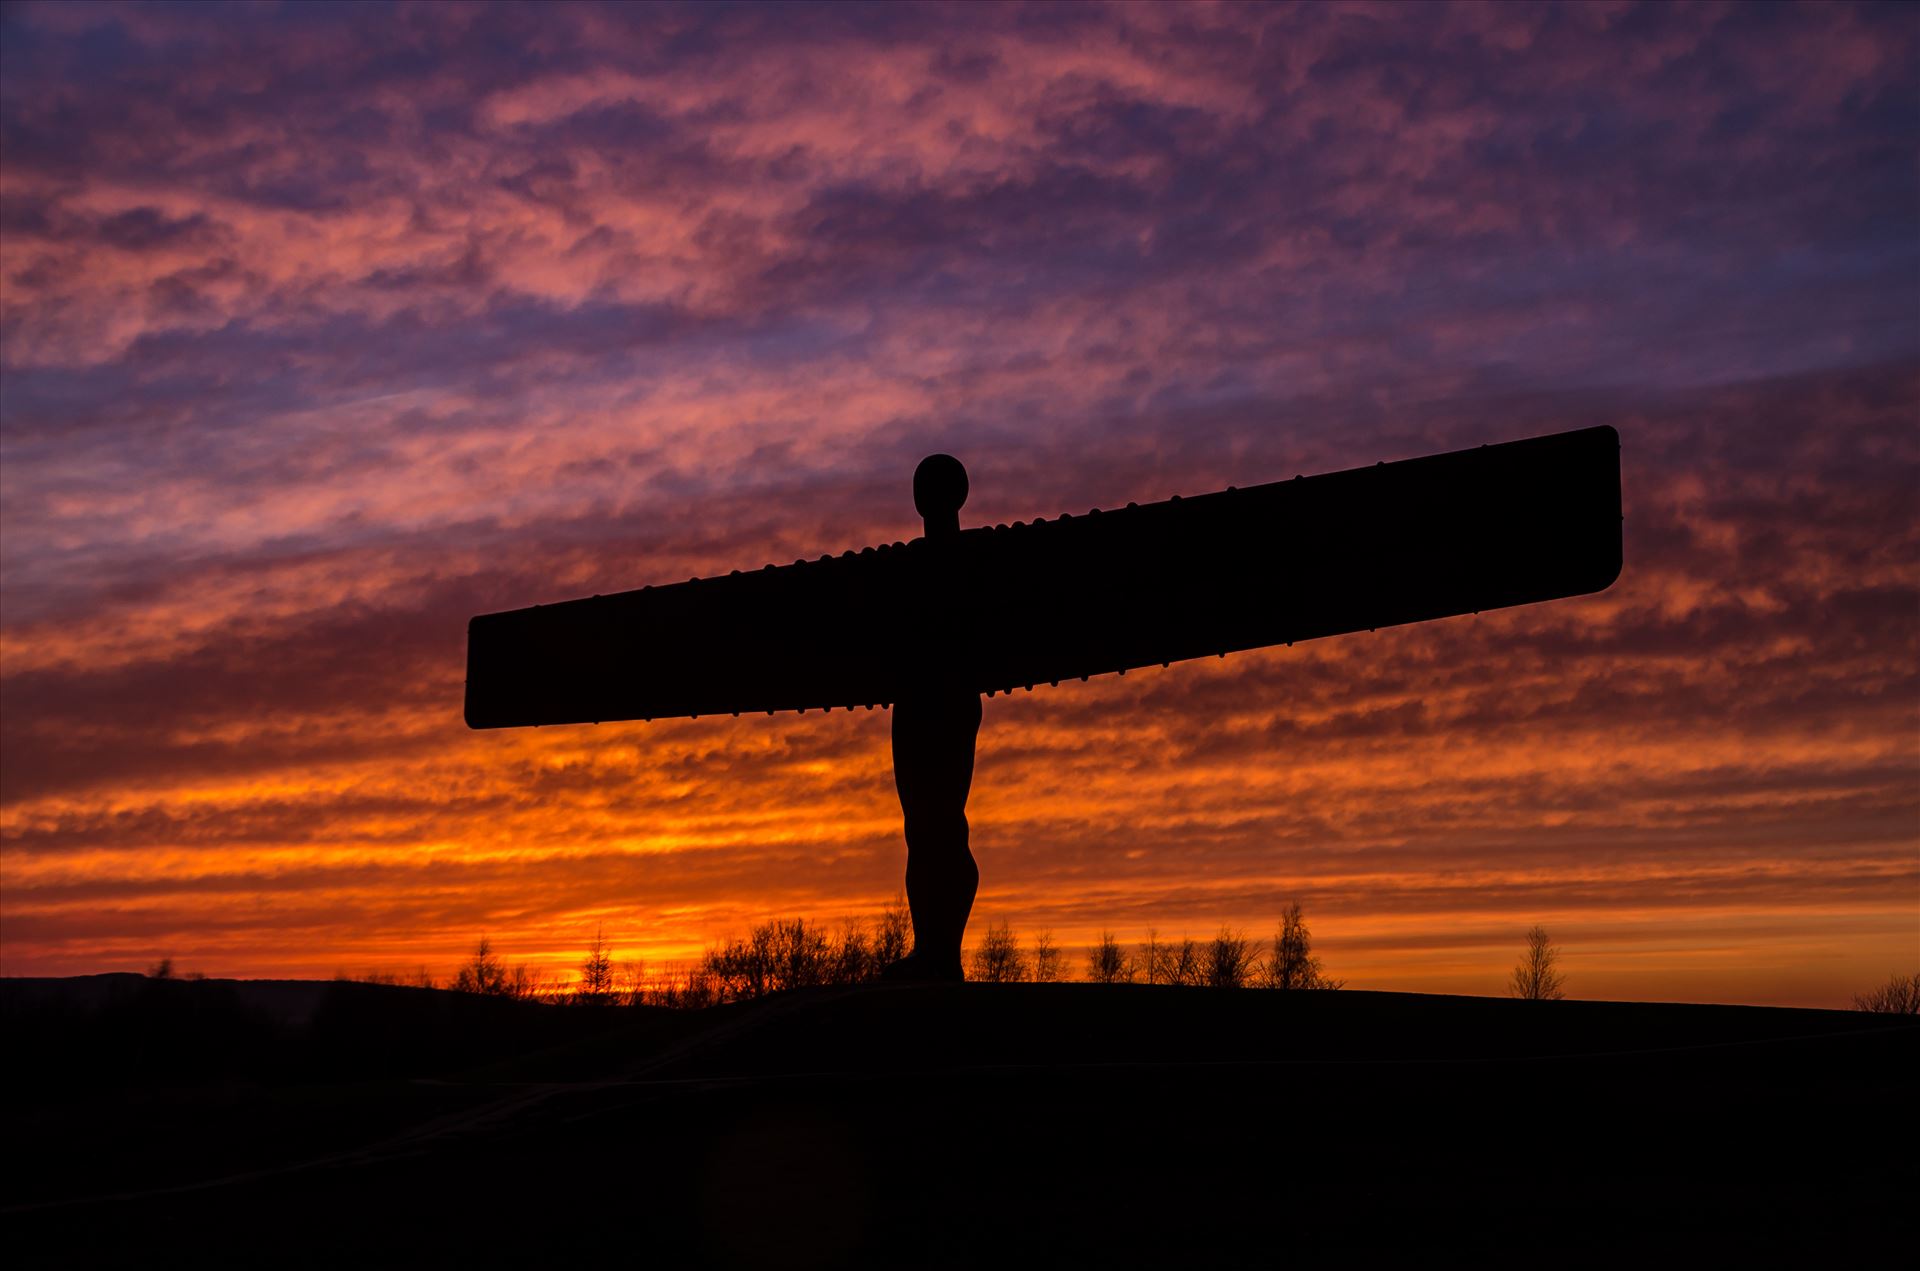 The Angel of the North at sunset - The Angel of the North is a contemporary sculpture, designed by Antony Gormley, located in Gateshead,  England.Completed in 1998, it is a steel sculpture of an angel, 20 metres (66 ft) tall, with wings measuring 54 metres (177 ft) across. by philreay